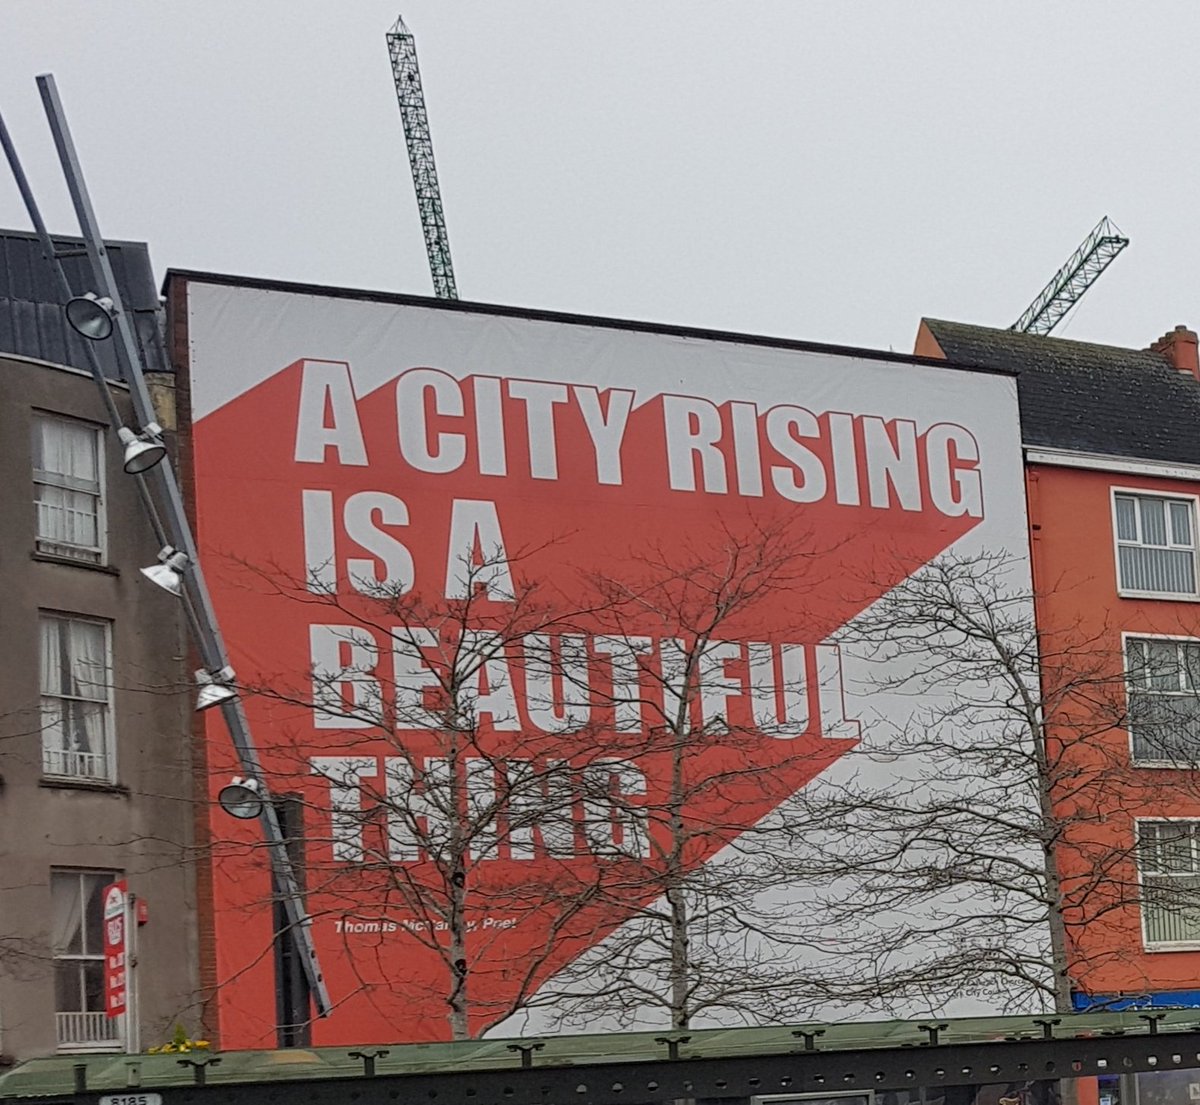 no idea what's story here but building looks right eyesore, ironically it homed "a city rising is a beautiful thing" banner previously make no sense at any level to have this level of decay & ugliness bang in Cork city centreNo. 101  #regeneration  #heritage  #wellbeing  #economy